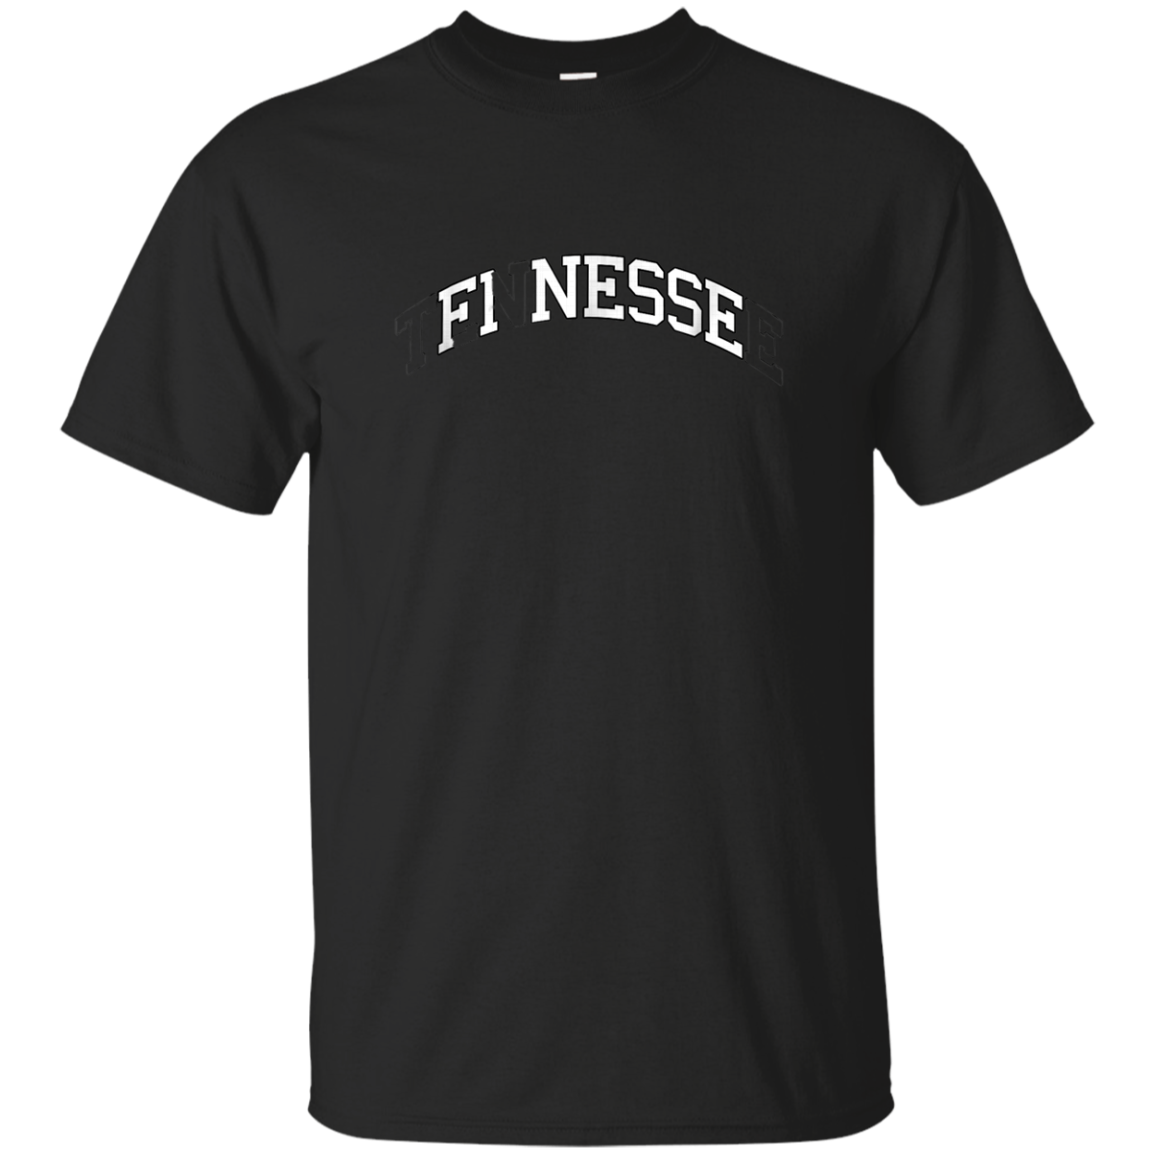 Finessee Finesse Tennessee G200 Ultra T-shirt